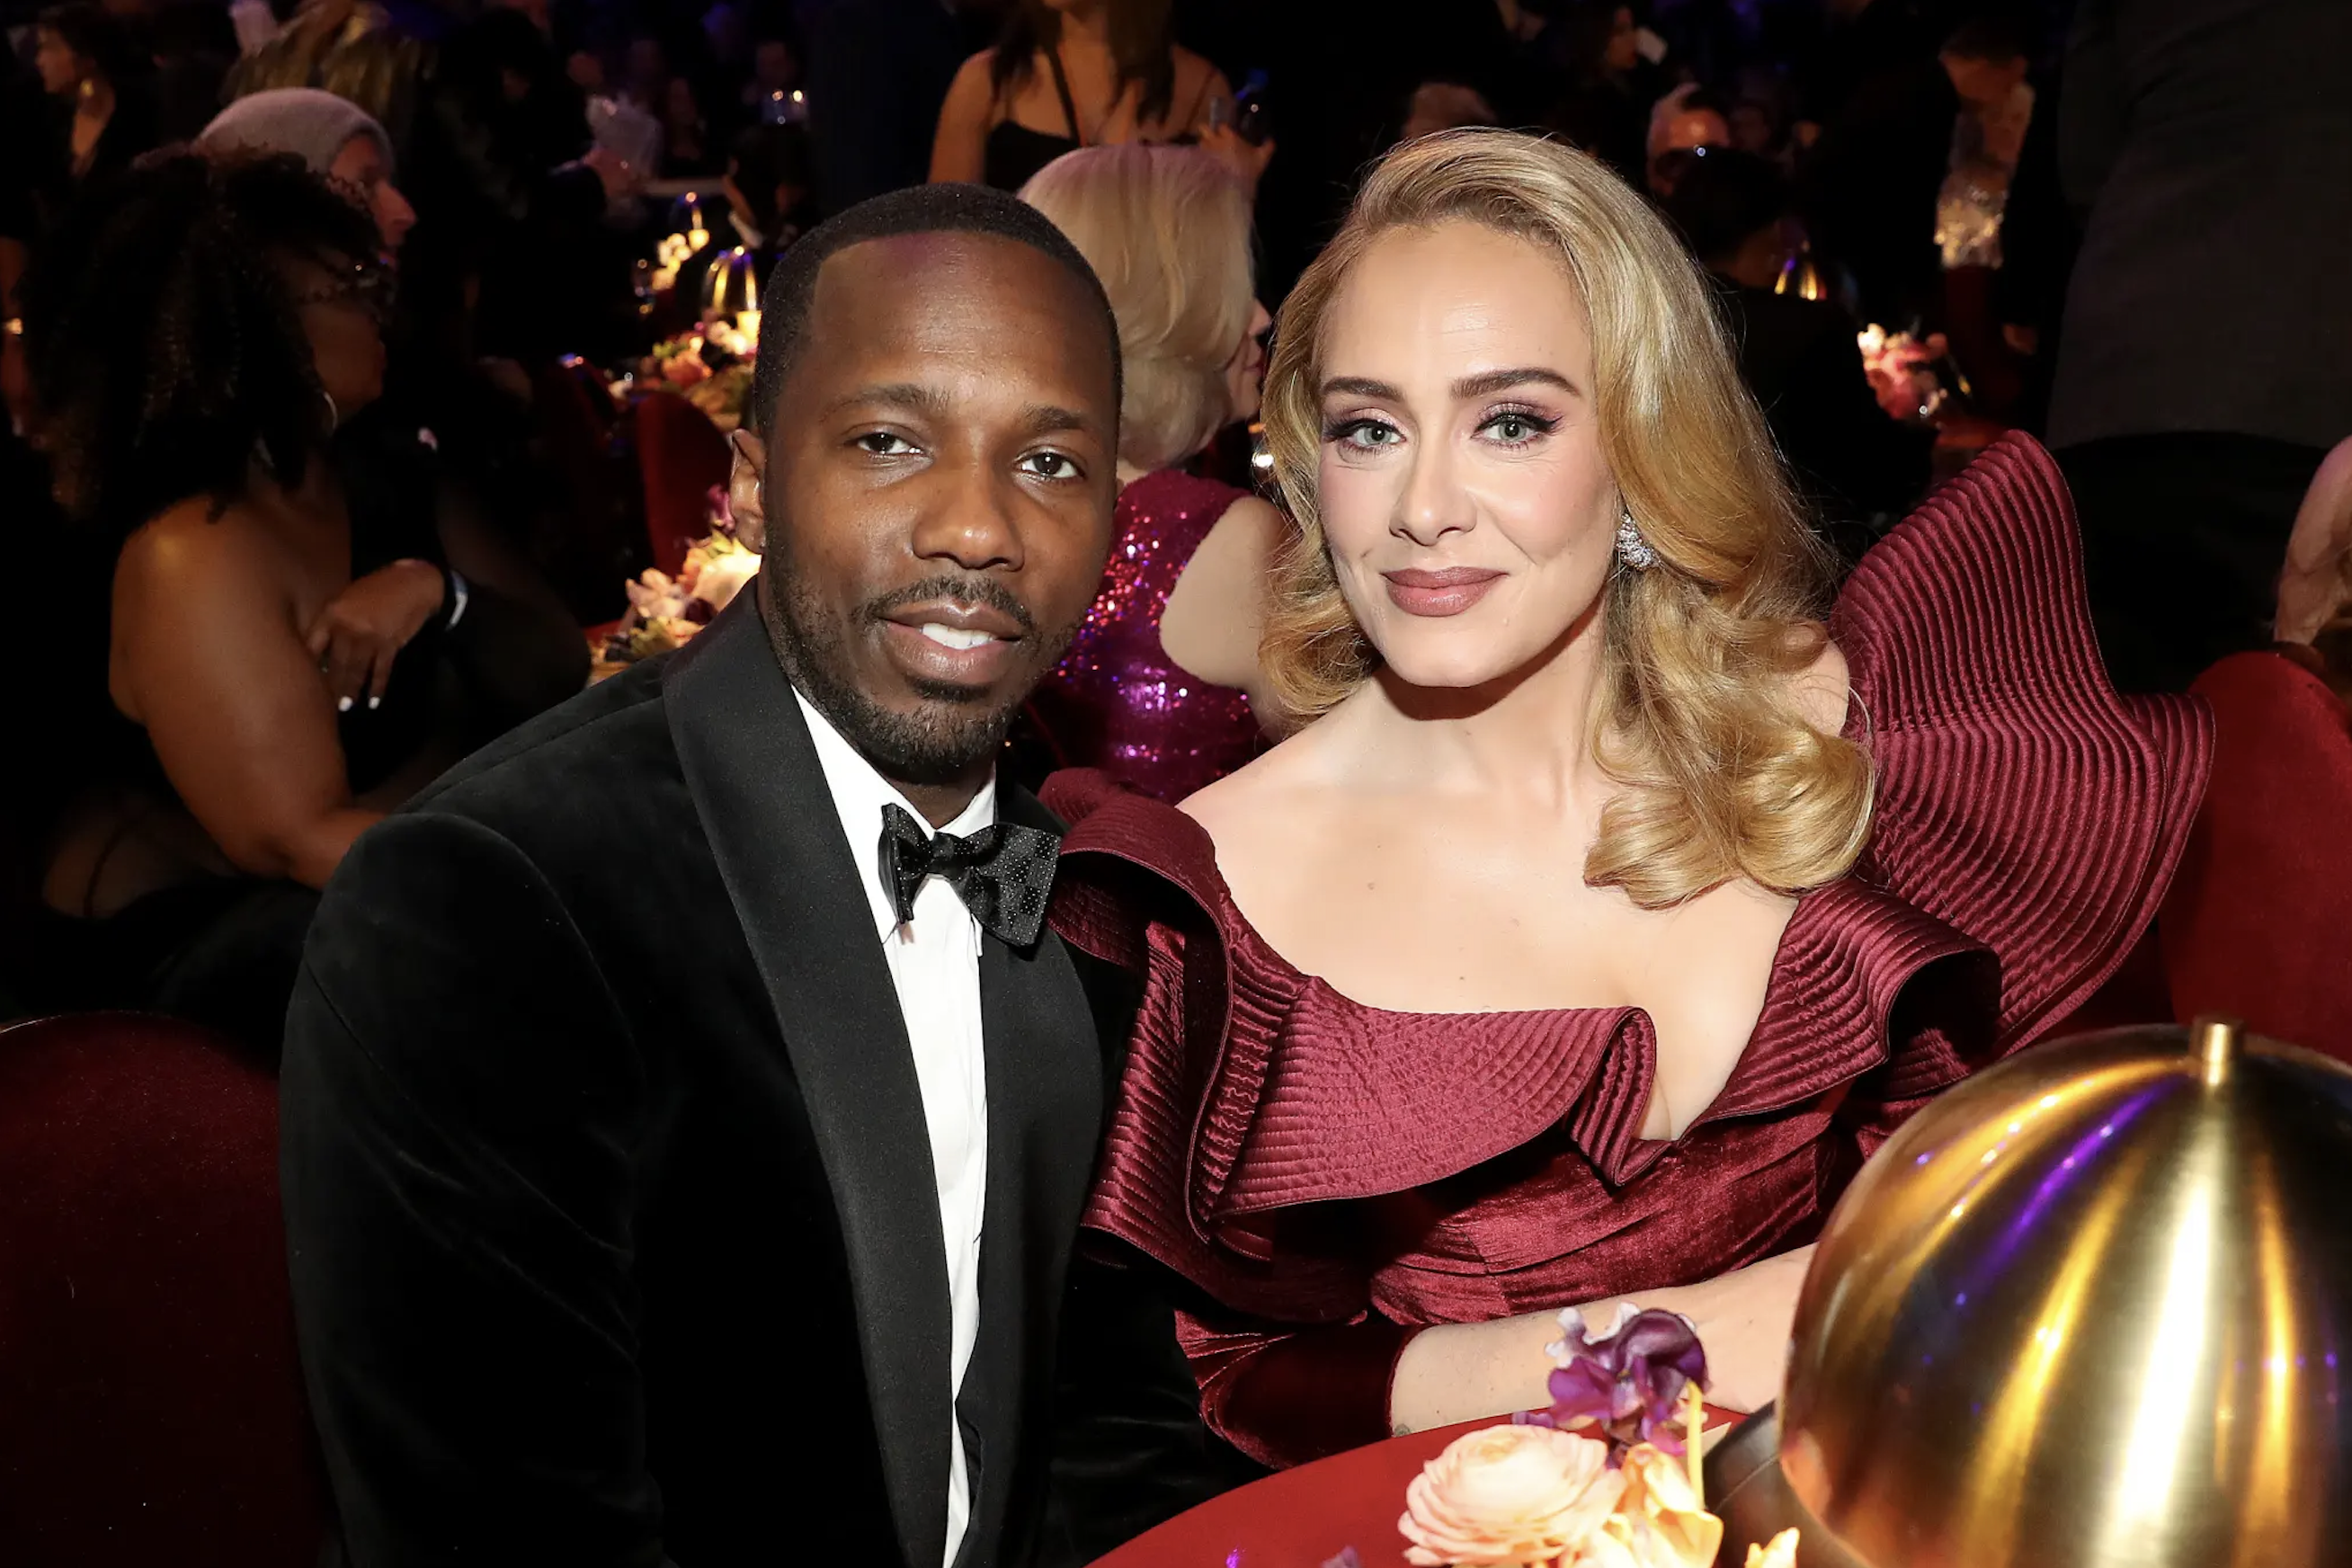 Adele sparks marriage speculation with Rich Paul after calling him her ‘husband’